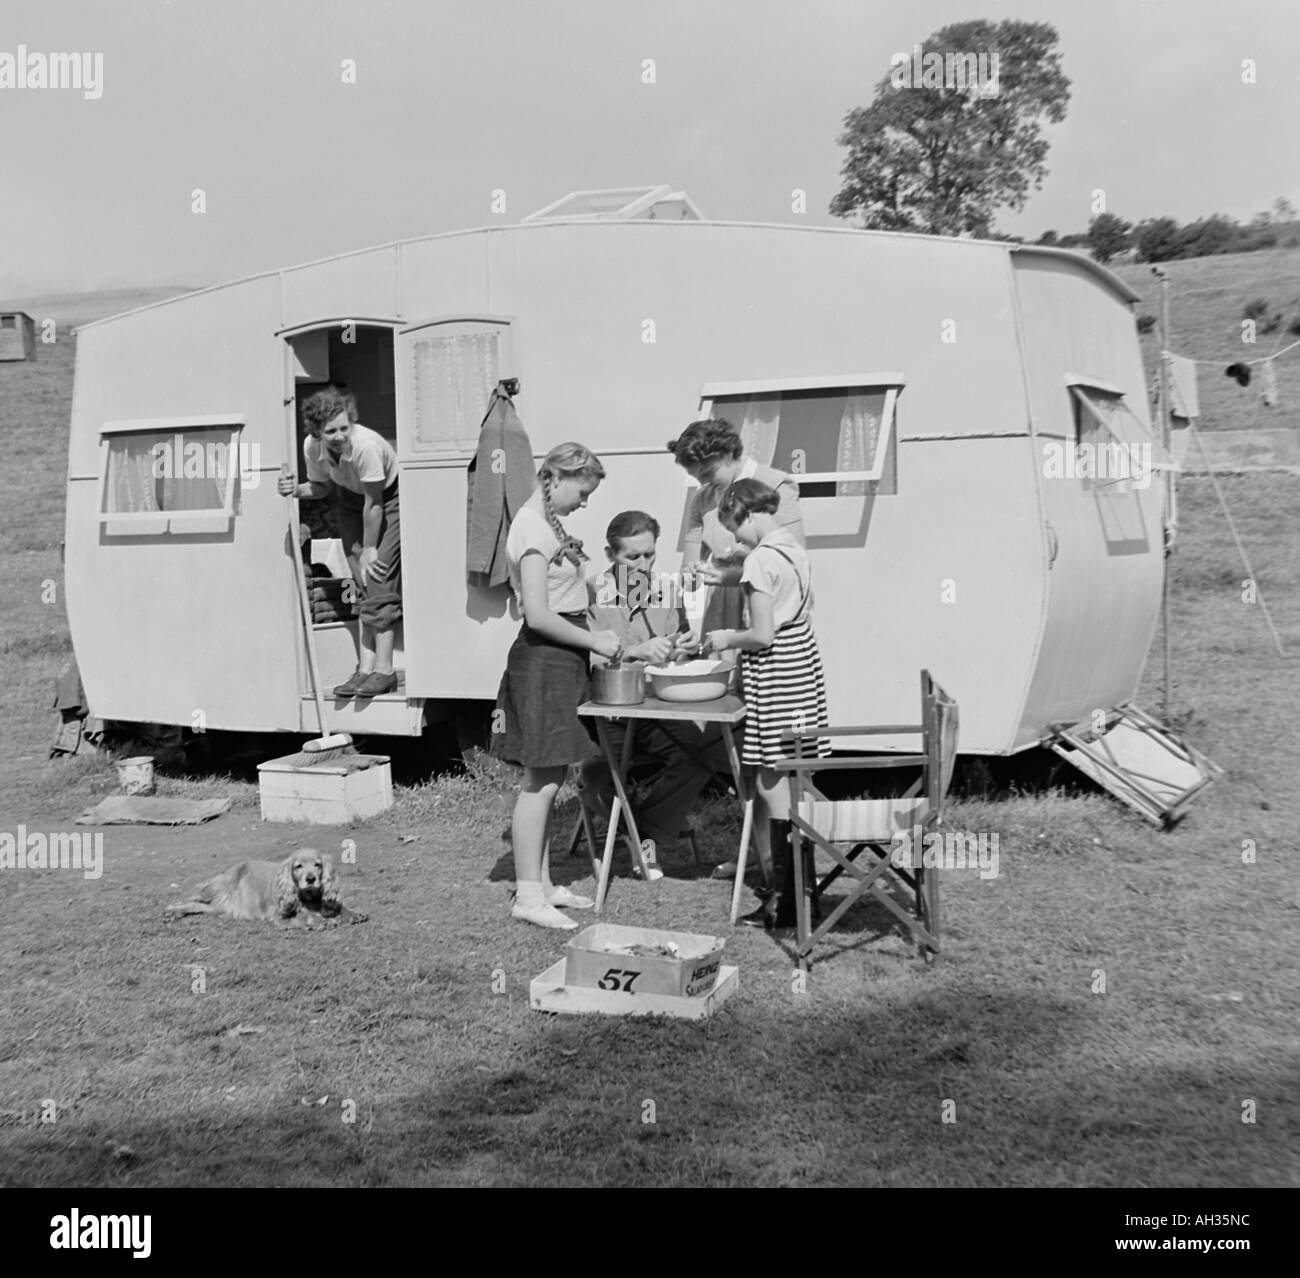 OLD VINTAGE FAMILY SNAPSHOT PHOTOGRAPH OF FAMILY ON CAMPING HOLIDAY WITH CARAVAN Stock Photo